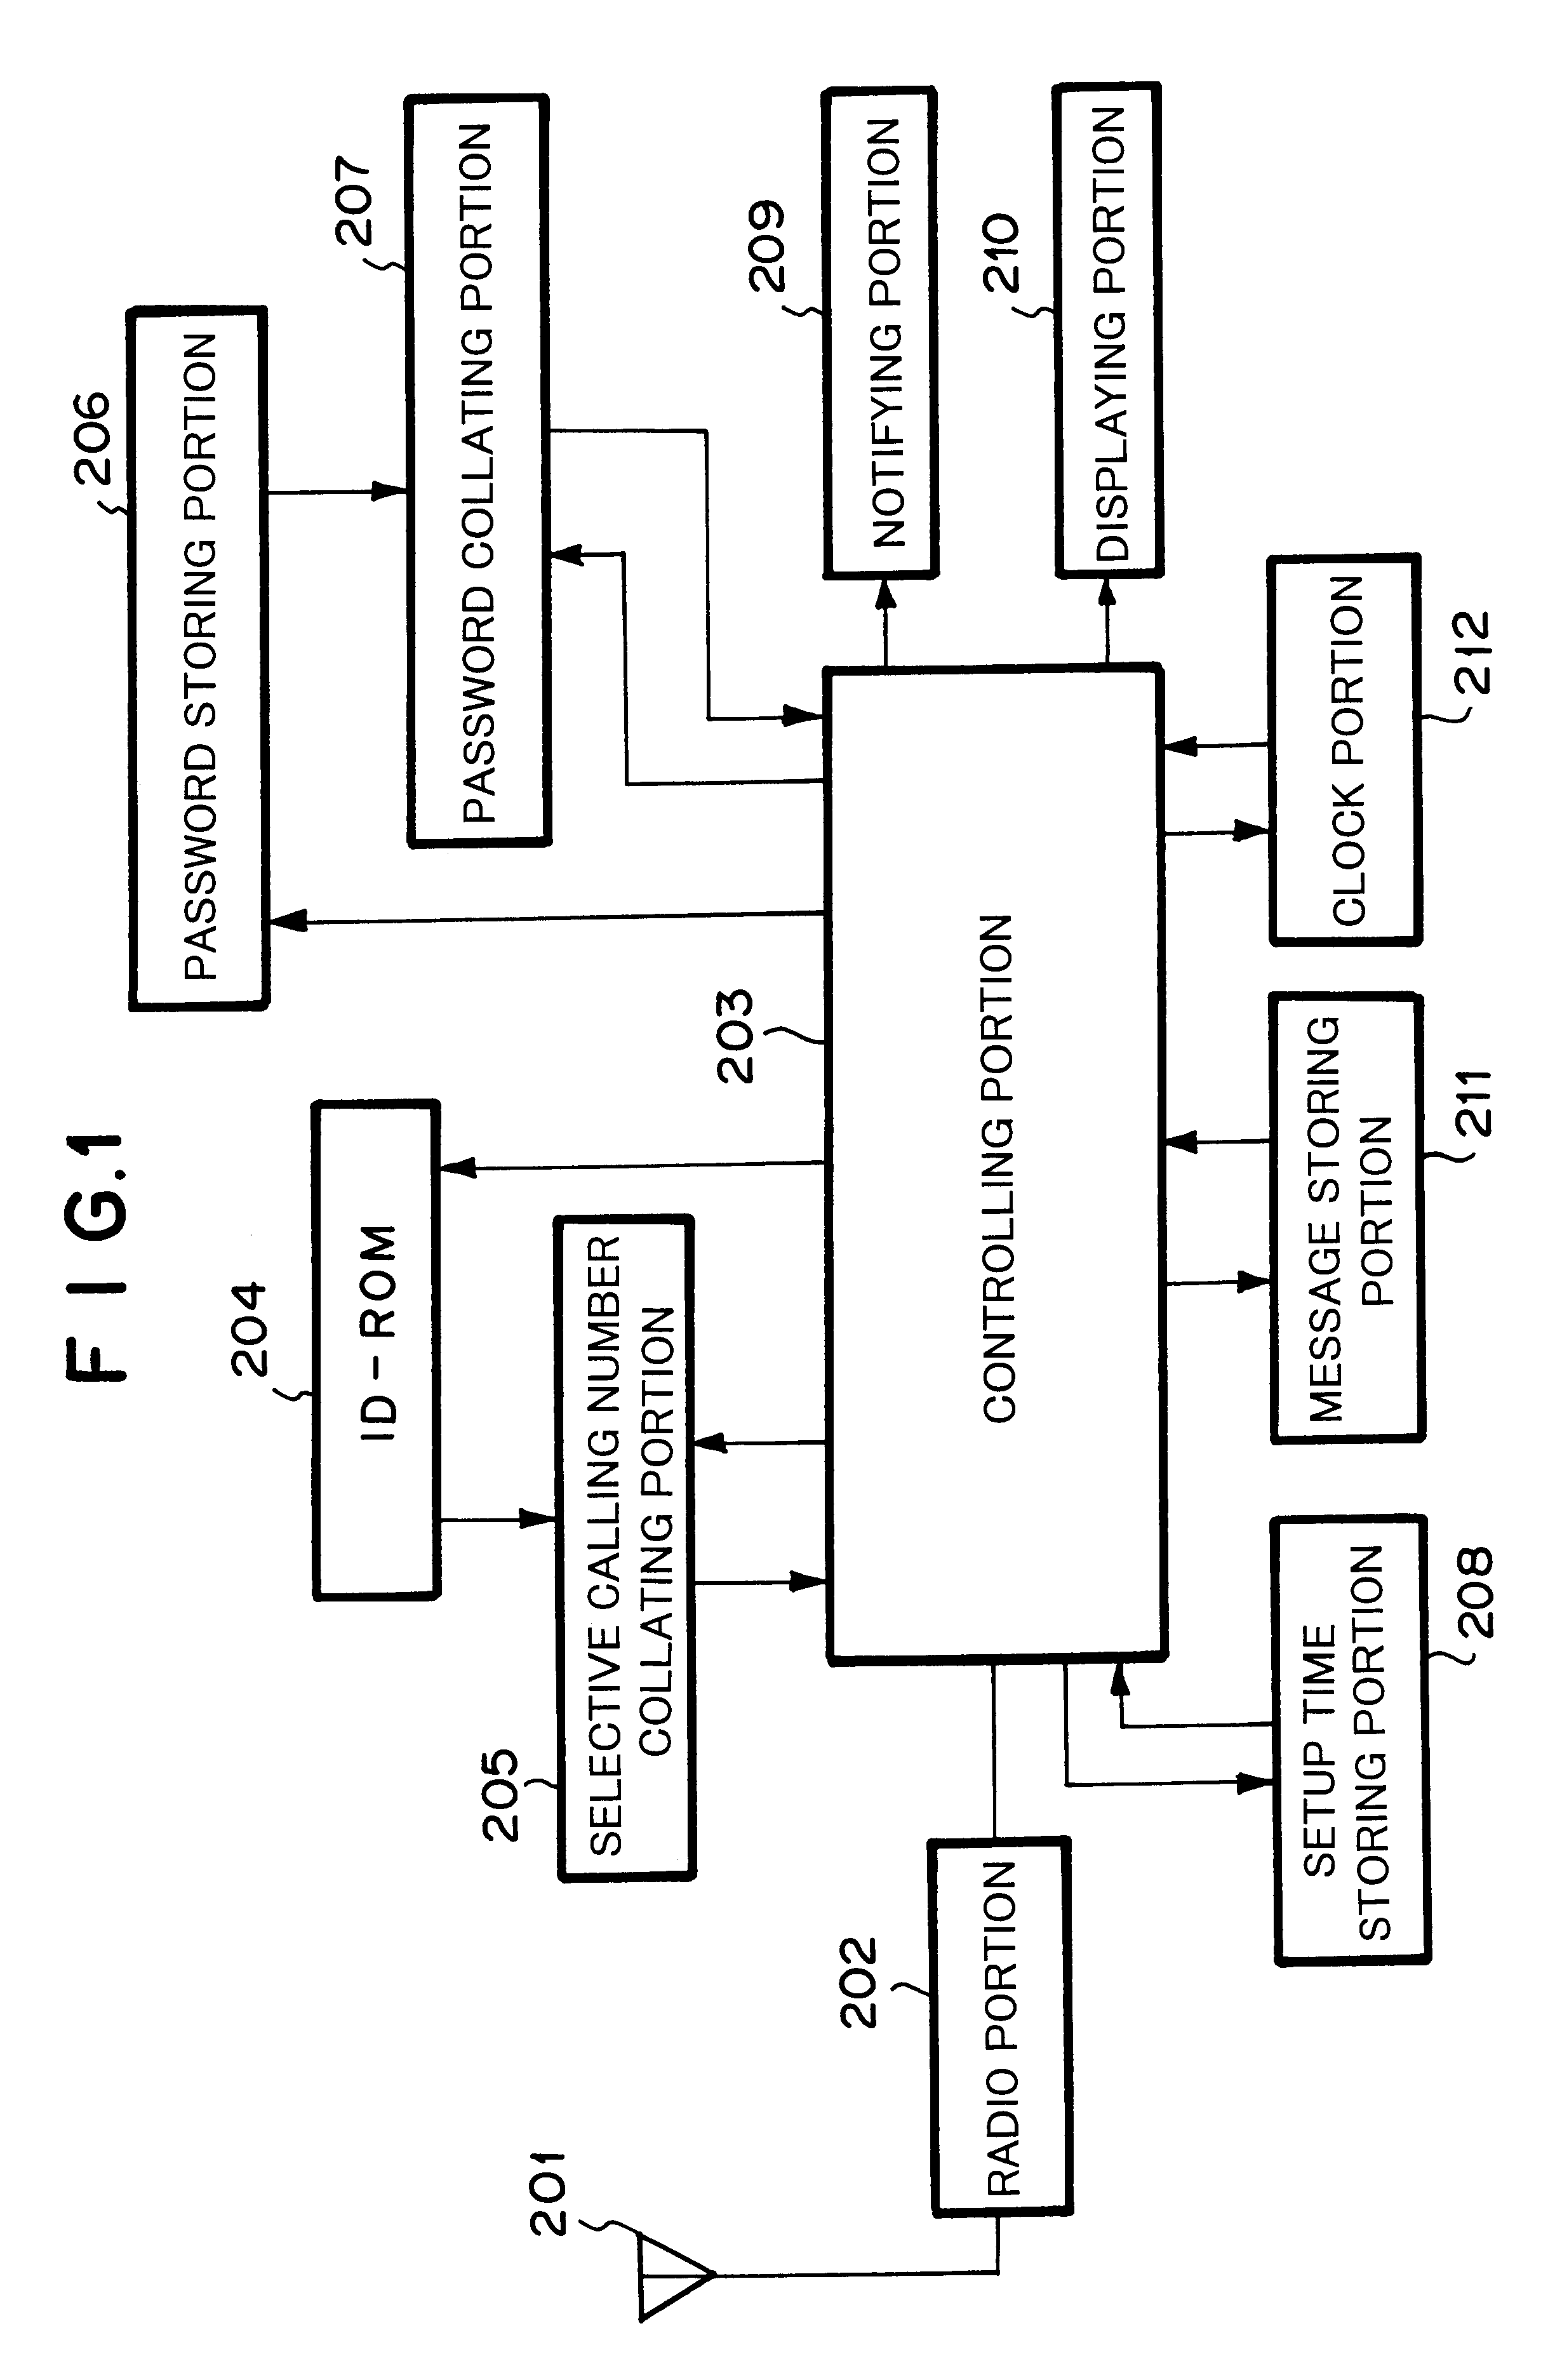 Radio selective calling receiver and portable telephone apparatus for efficiently managing received call